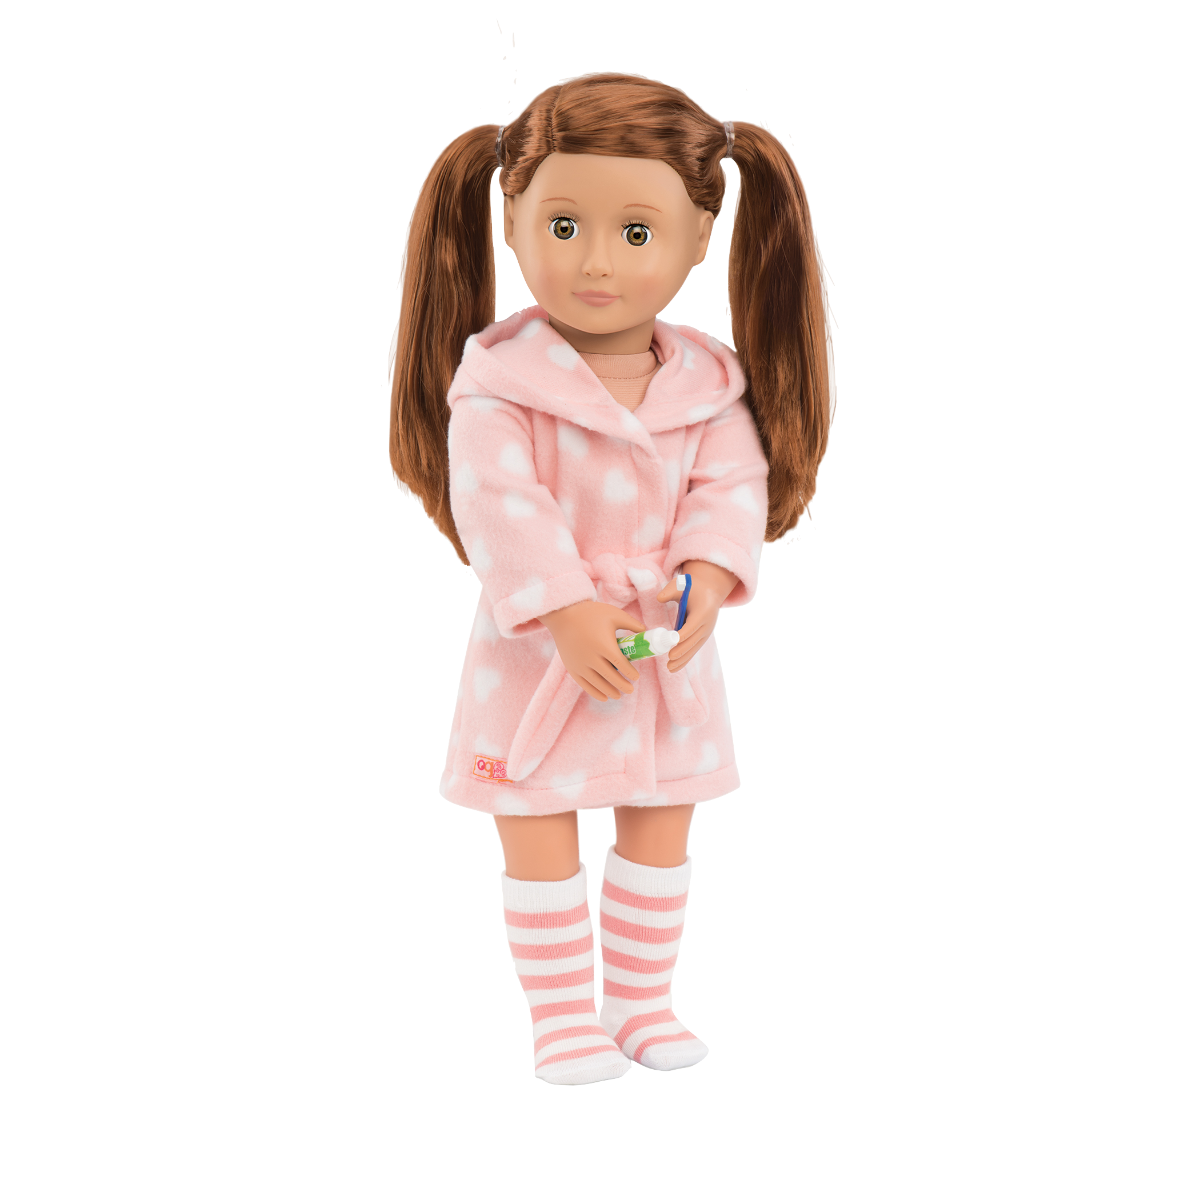 Rabbit Warm Suit Fits For American Girl 18 Inch American, 58% OFF